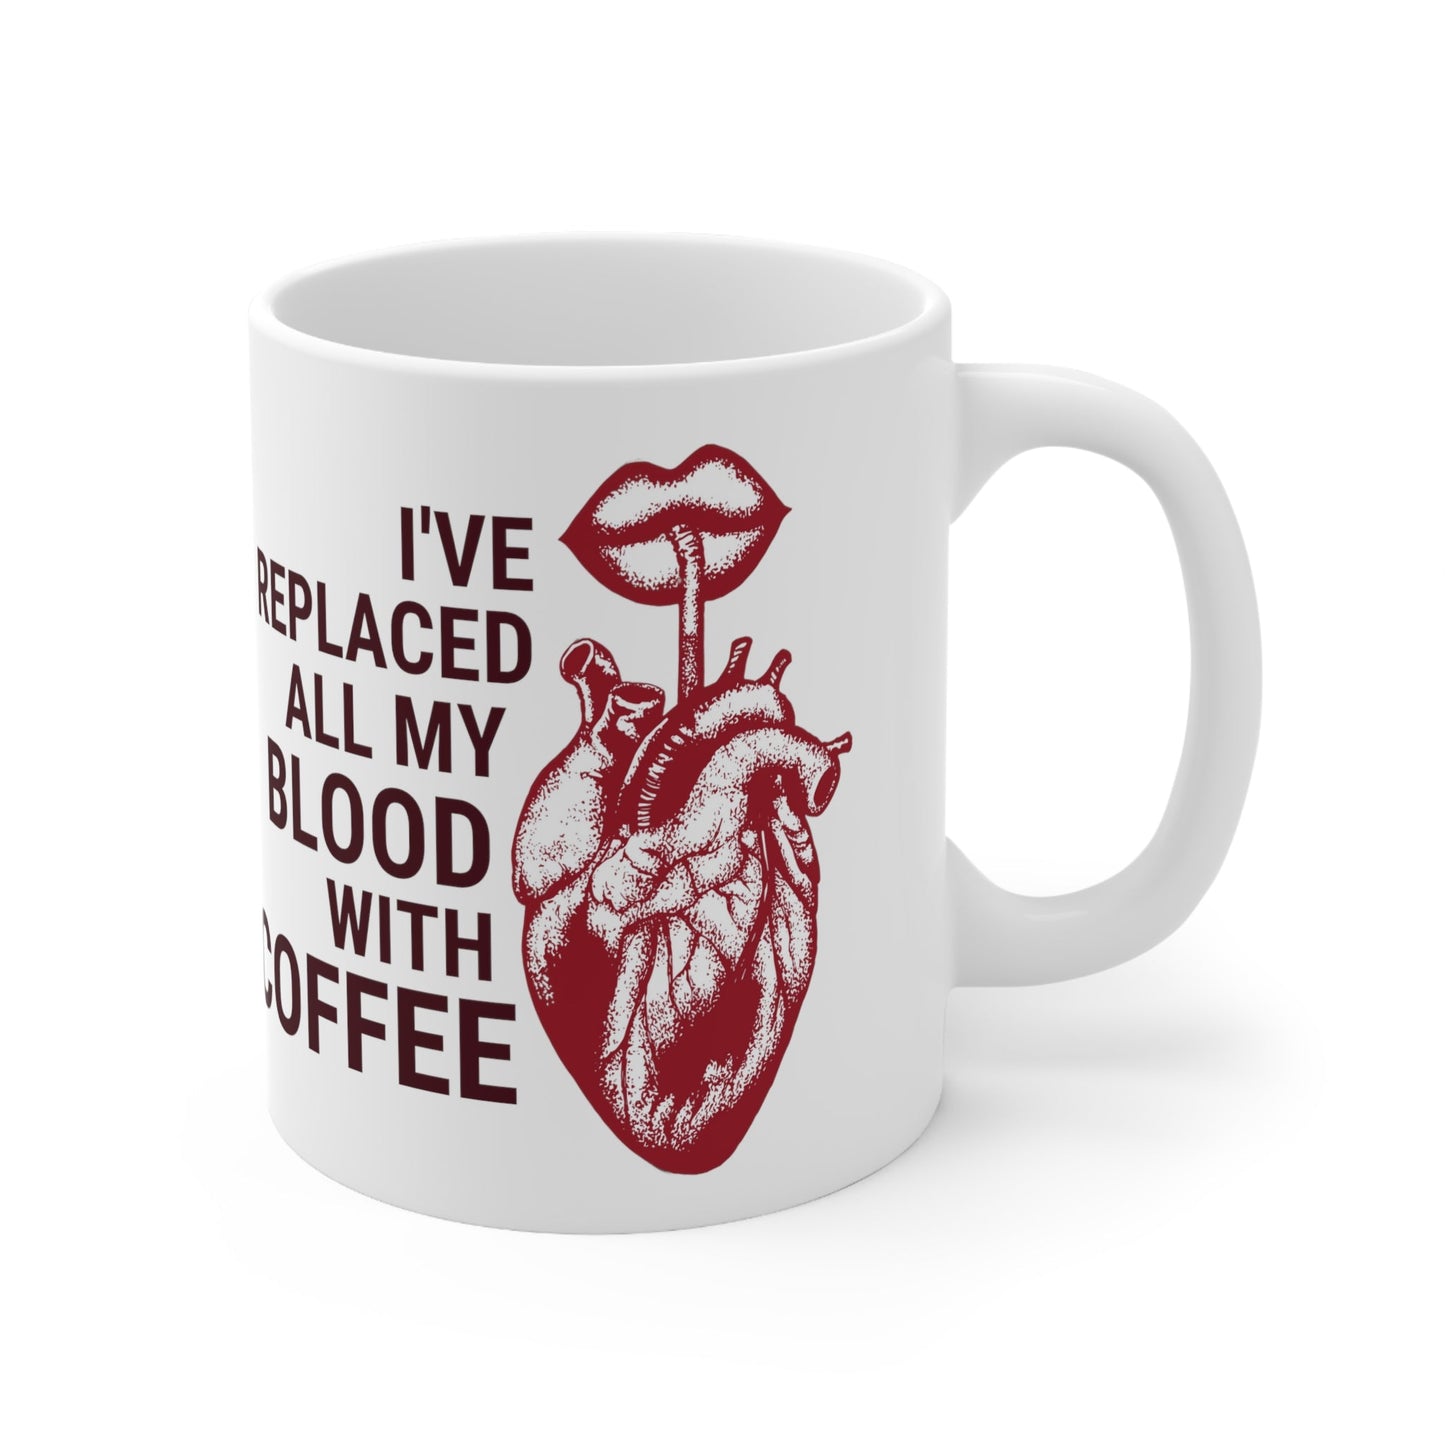 I've Replaced All My Blood With Coffee Ceramic Mug 11oz